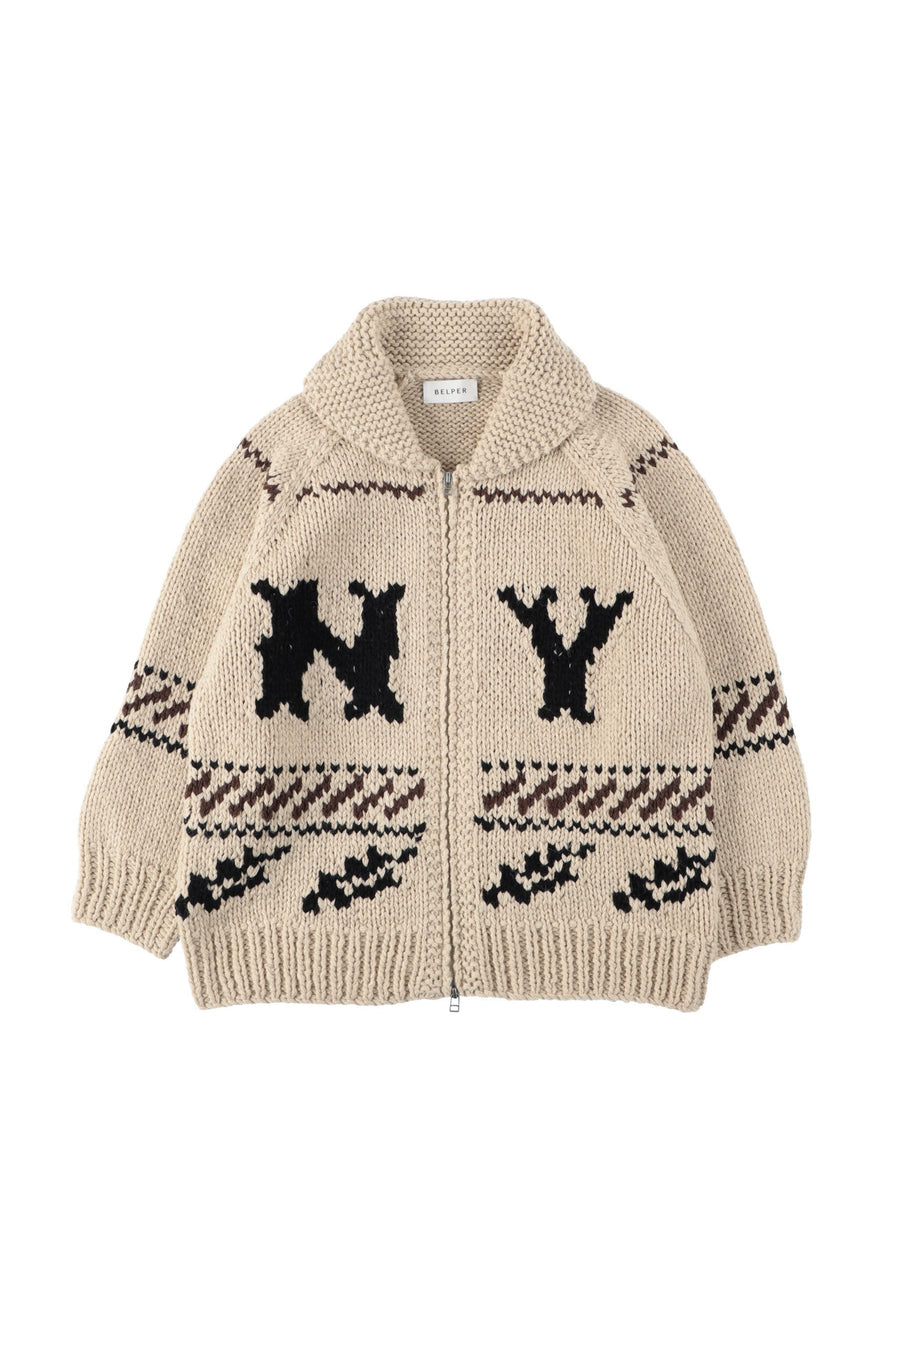 WIND AND SEA Cowichan Knit Outet BEIGE L - ニット/セーター